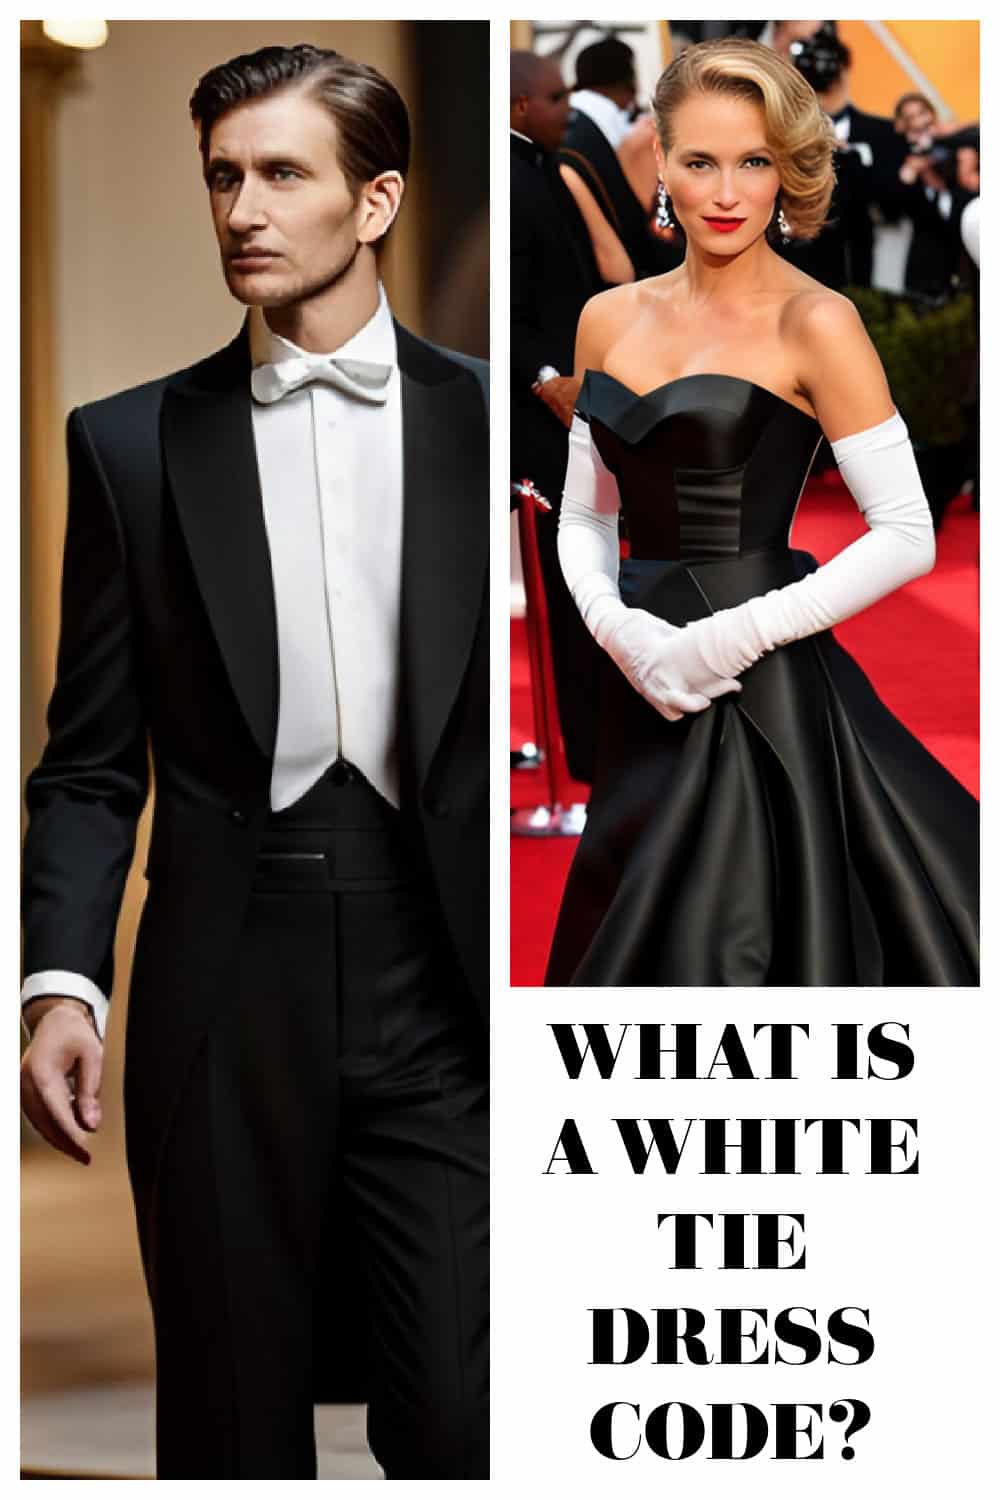 Wondering about a white tie dress code? Find out what to wear to a white tie event and the best evening wear for formal occasions.